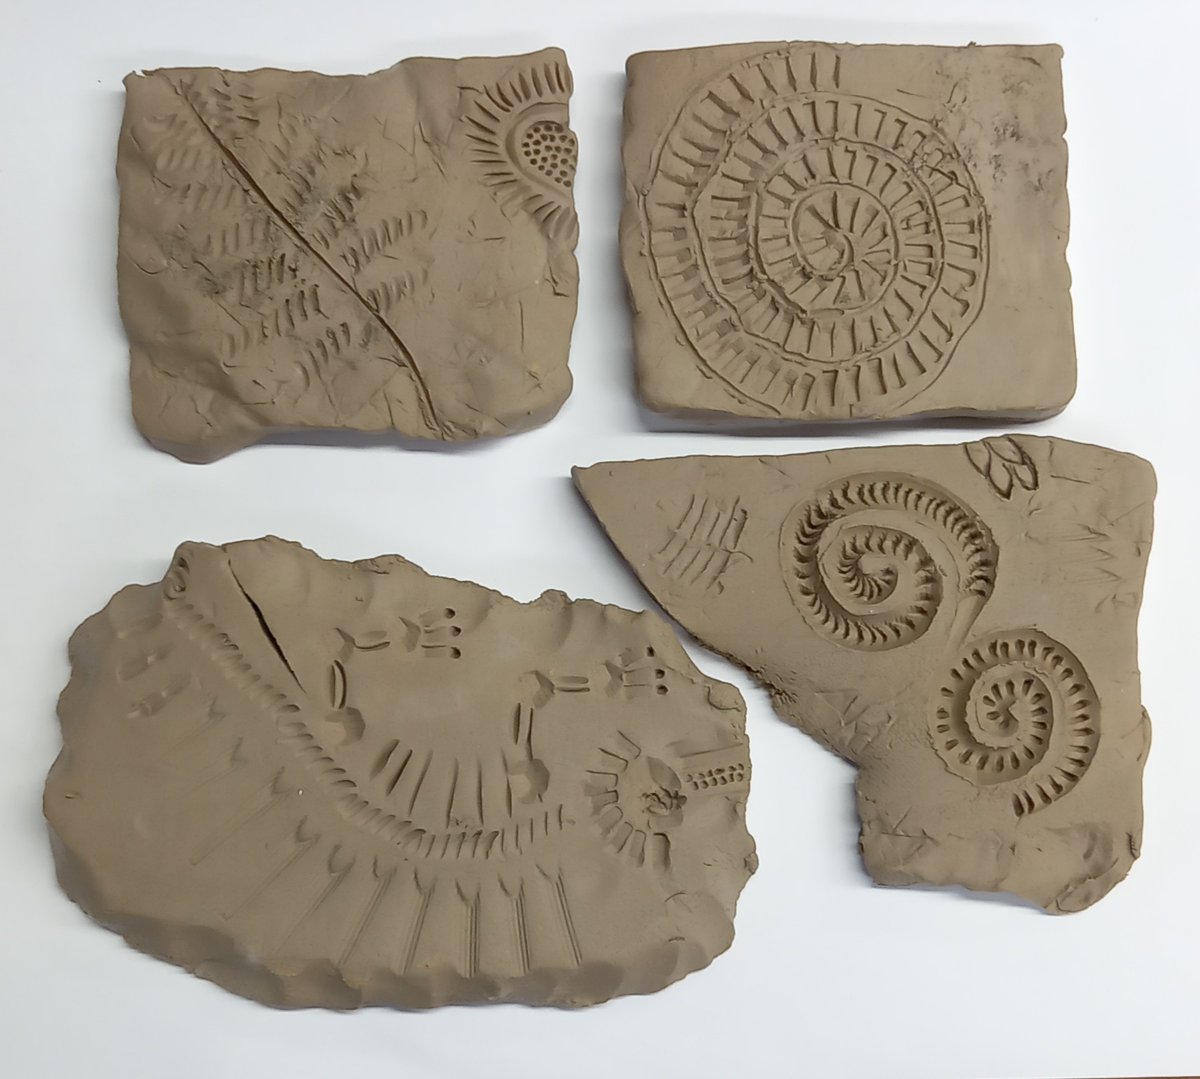 Have a go at making your very own fossil to take home from clay on Weds 14 and Thurs 15 Feb. Make marks in the clay using a variety of materials provided or by using the clay tools. £3 per go. Drop in between 10.30am -12:00 and 1-3pm #VisitStoke #SoTCityCouncil